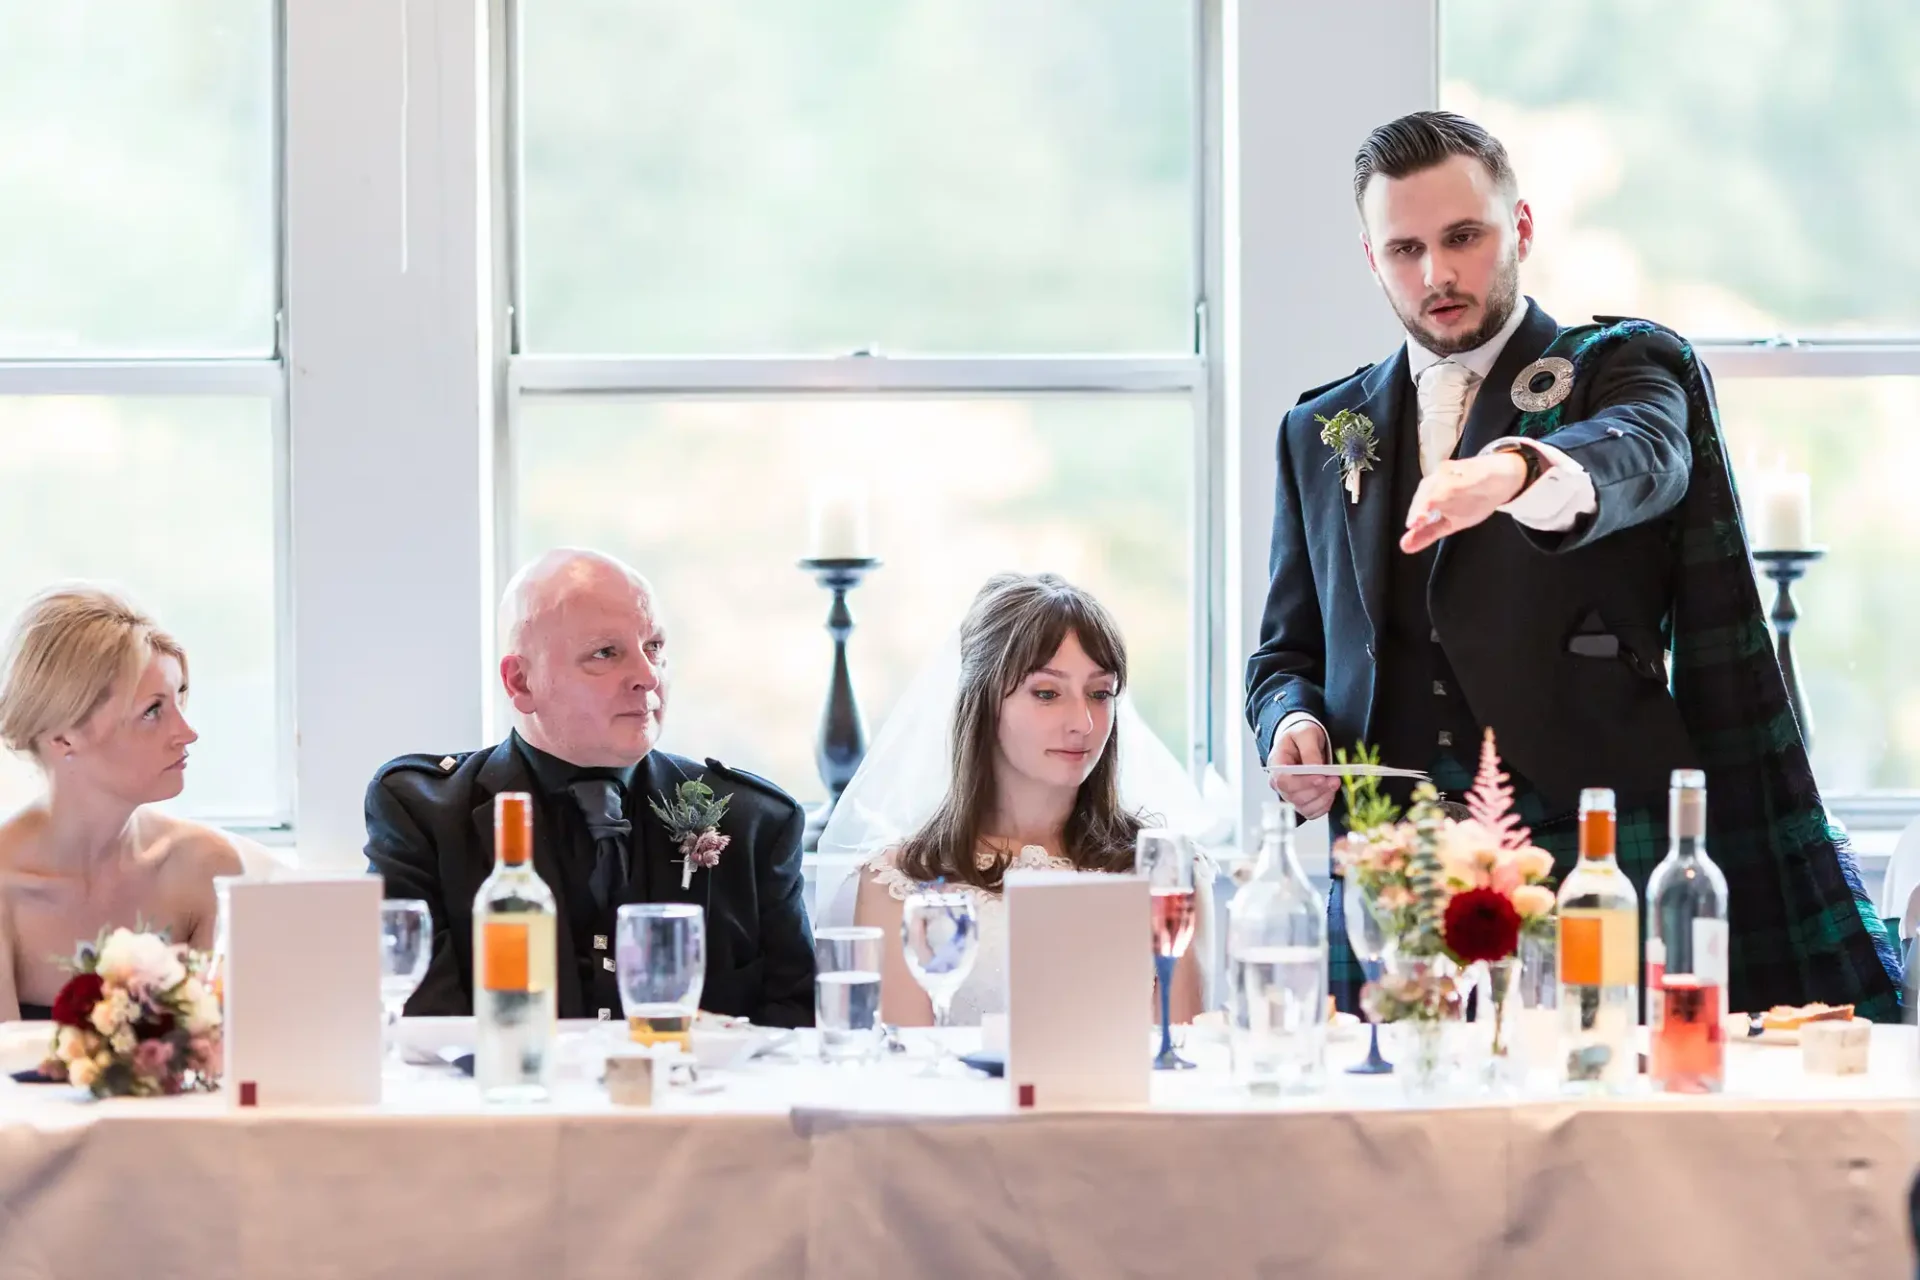 A man in a kilt speaks animatedly at a wedding table, pointing forward, while a bride and three other guests listen attentively.